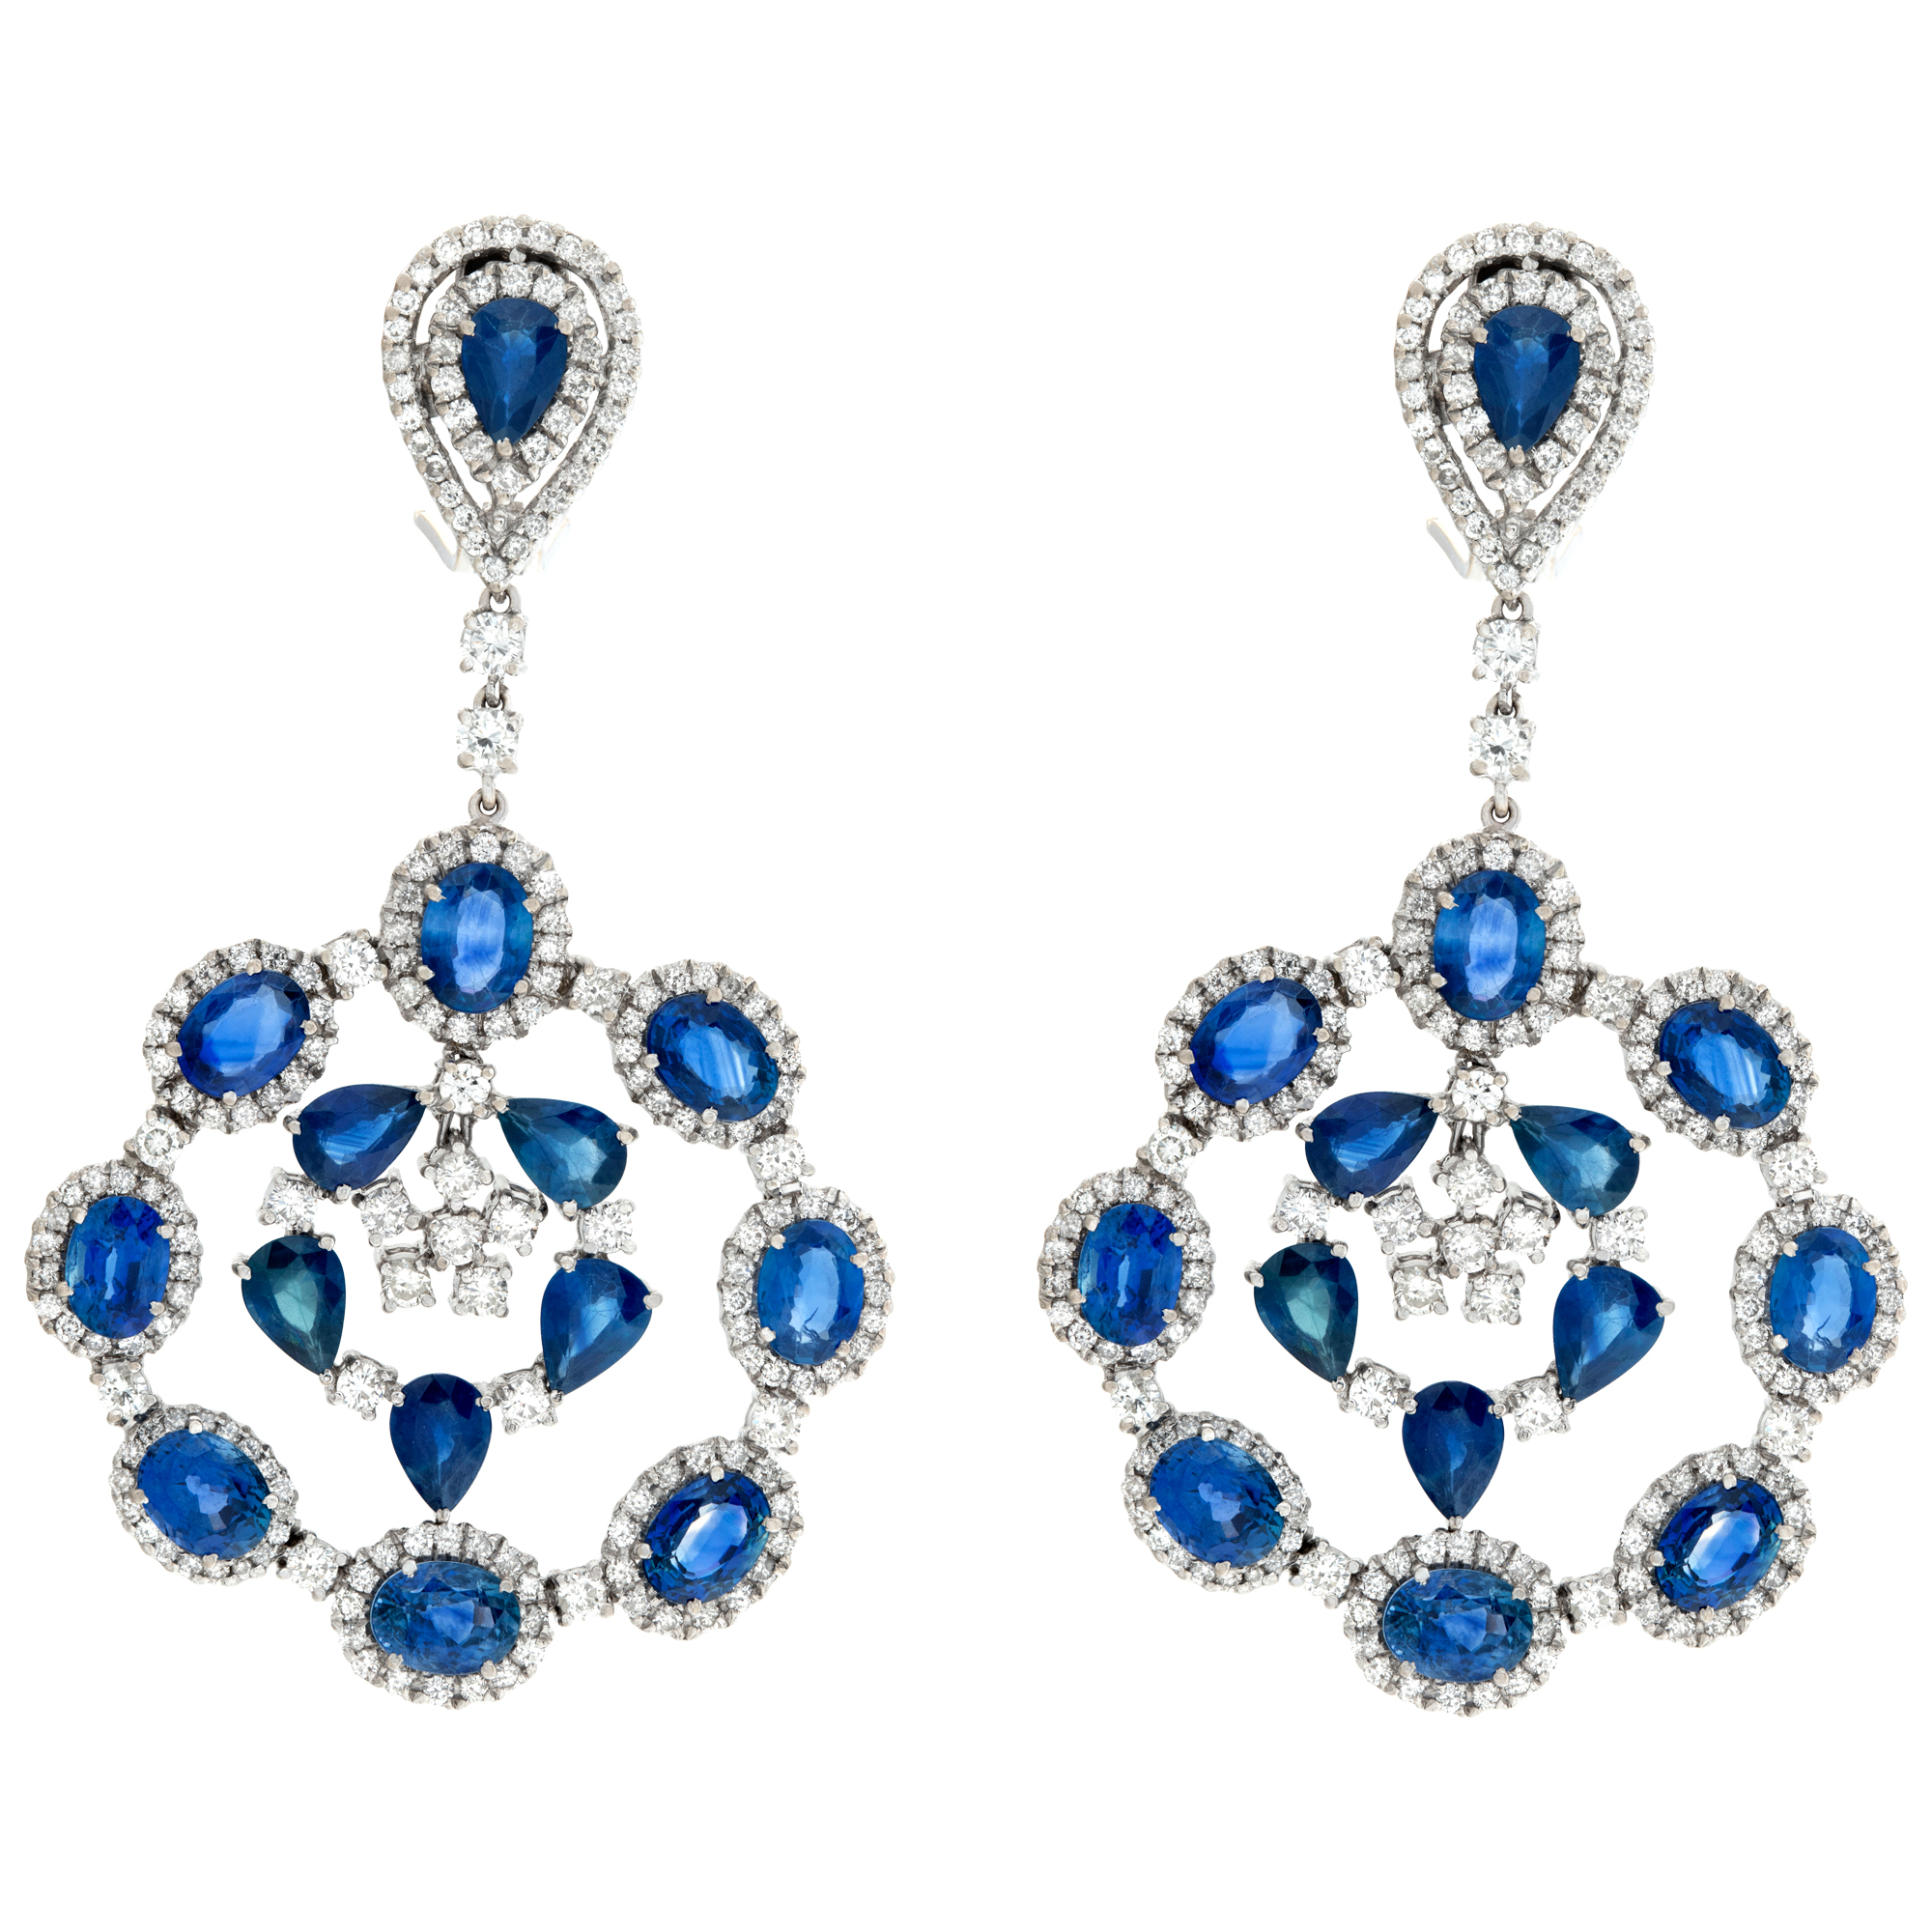 18k white gold drop earrings with 6.71 cts in diamonds and 29.52 cts in sapphires